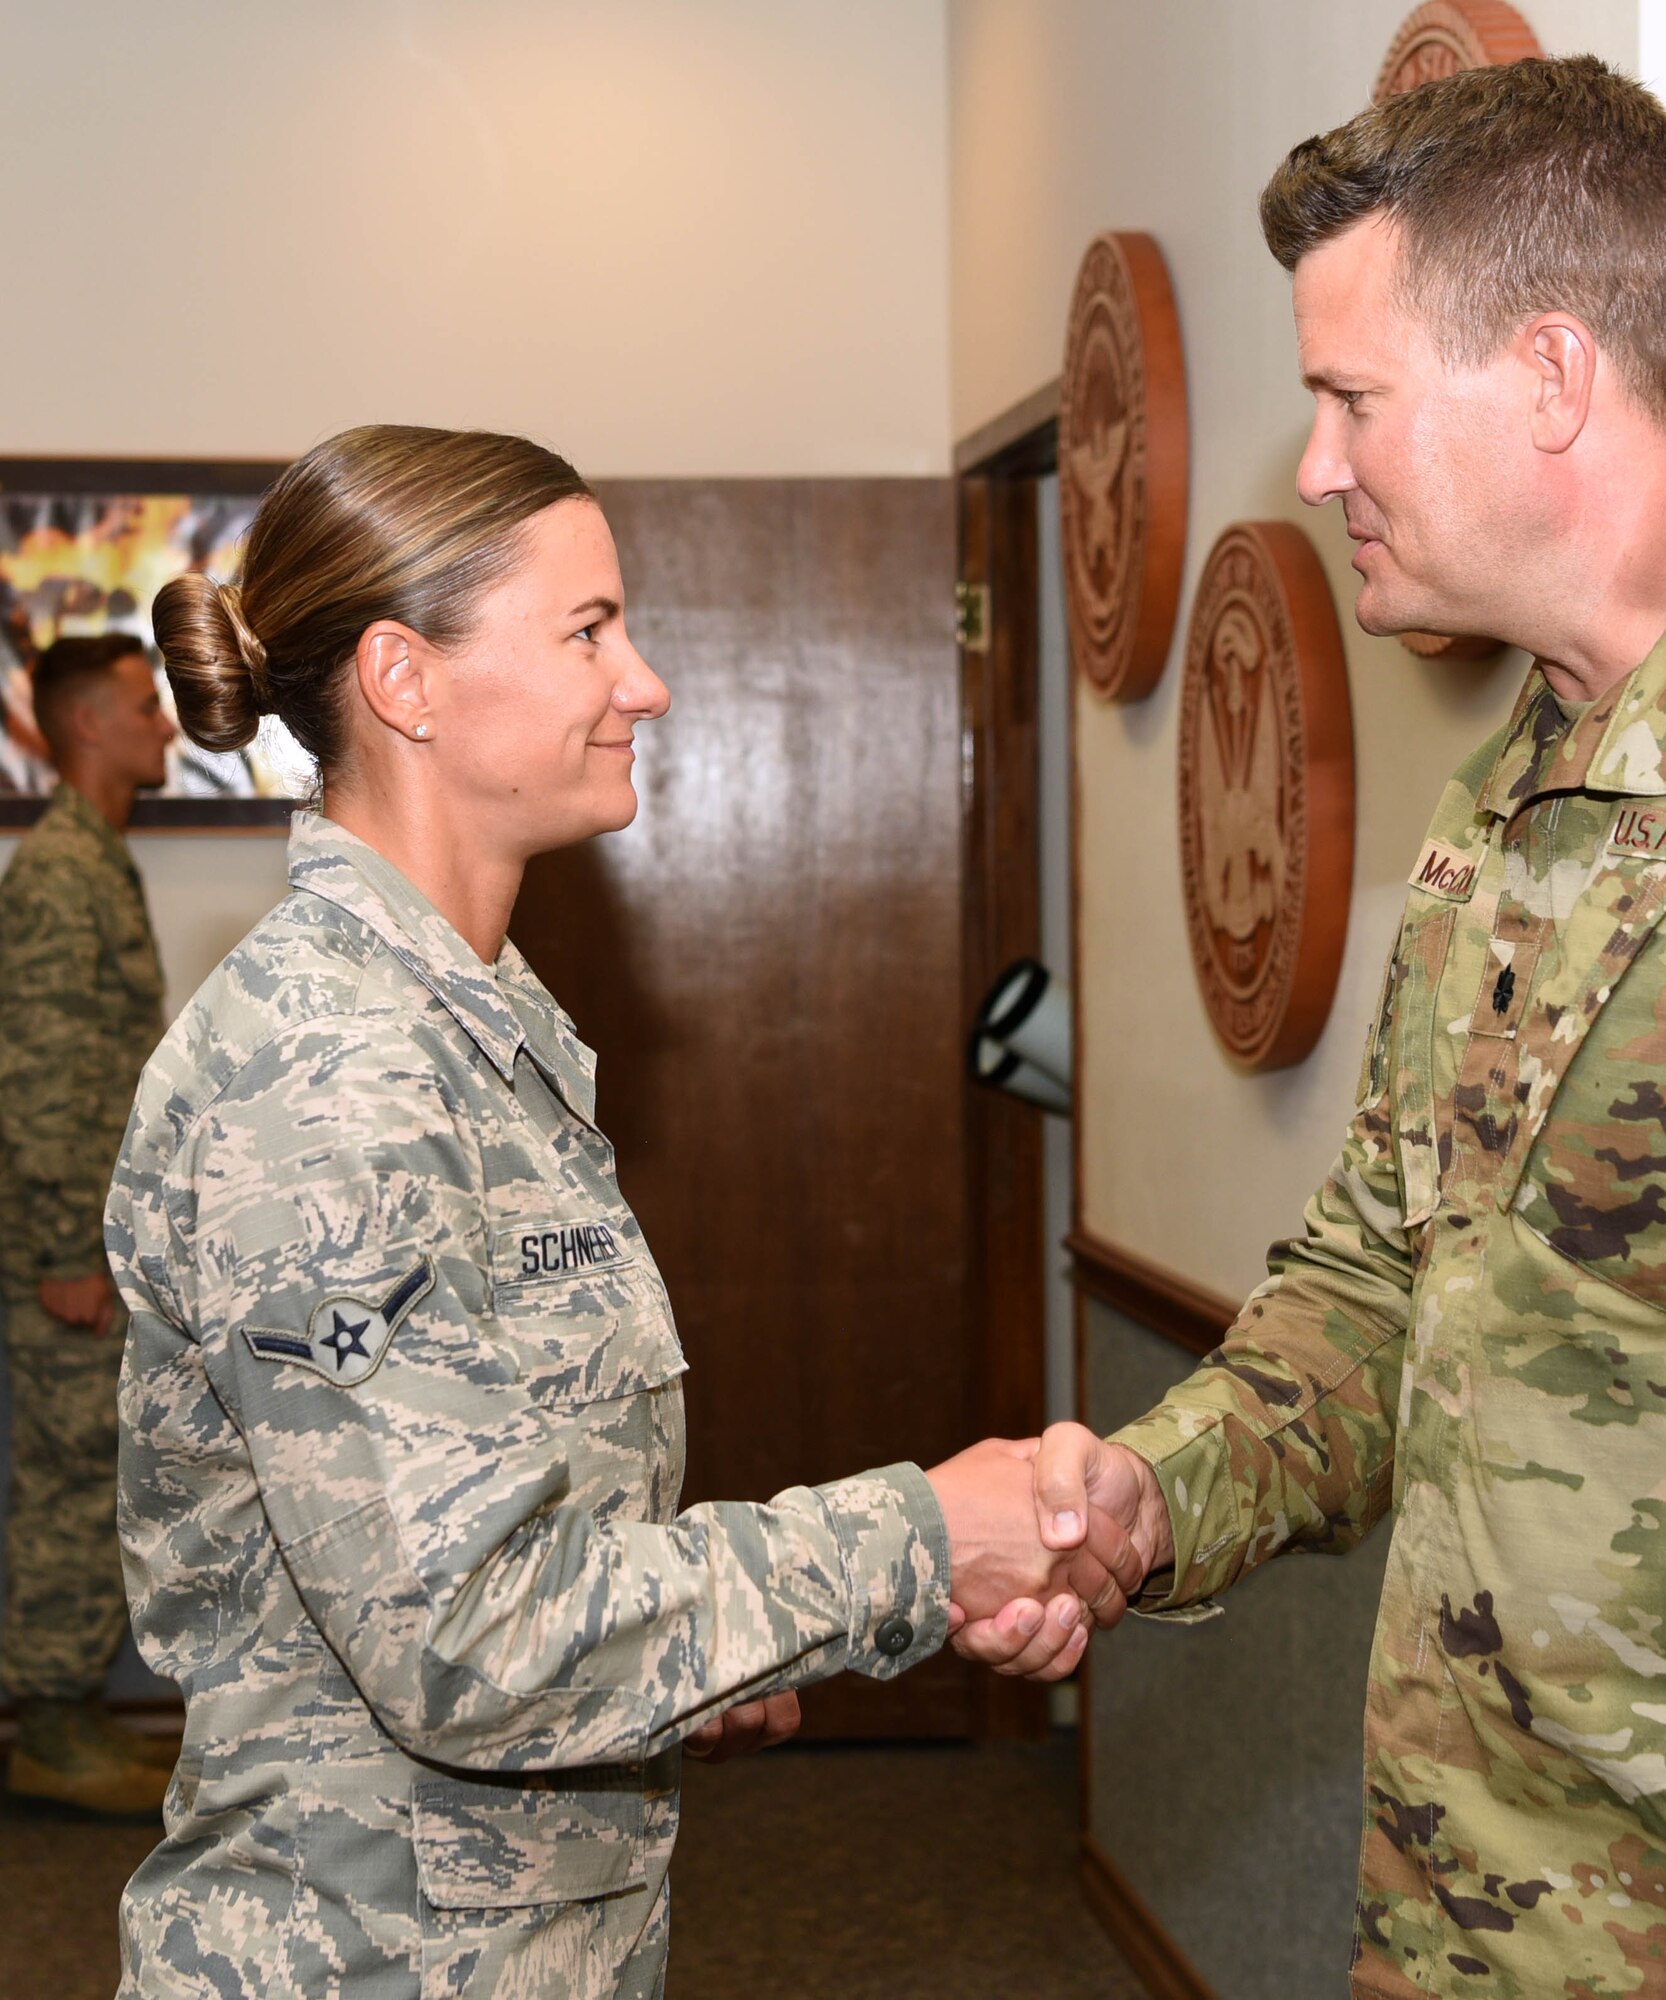 U.S. Air Force Lt. Col. Michael McCourt, 312th Training Squadron commander, congratulates Airman Kristina Schneider, 312th Training Squadron fire protection student during her graduation at the Louis F. Garland Department of Defense Fire Academy on Goodfellow Air Force Base, Texas, August 20, 2019. Schneider successfully finished a 20-day fire suppression course where students learn with a hands on approach to a variety of burning environments, such as vehicle, ground, and building fires. (U.S. Air Force photo by Airman 1st Class Abbey Rieves/Released)